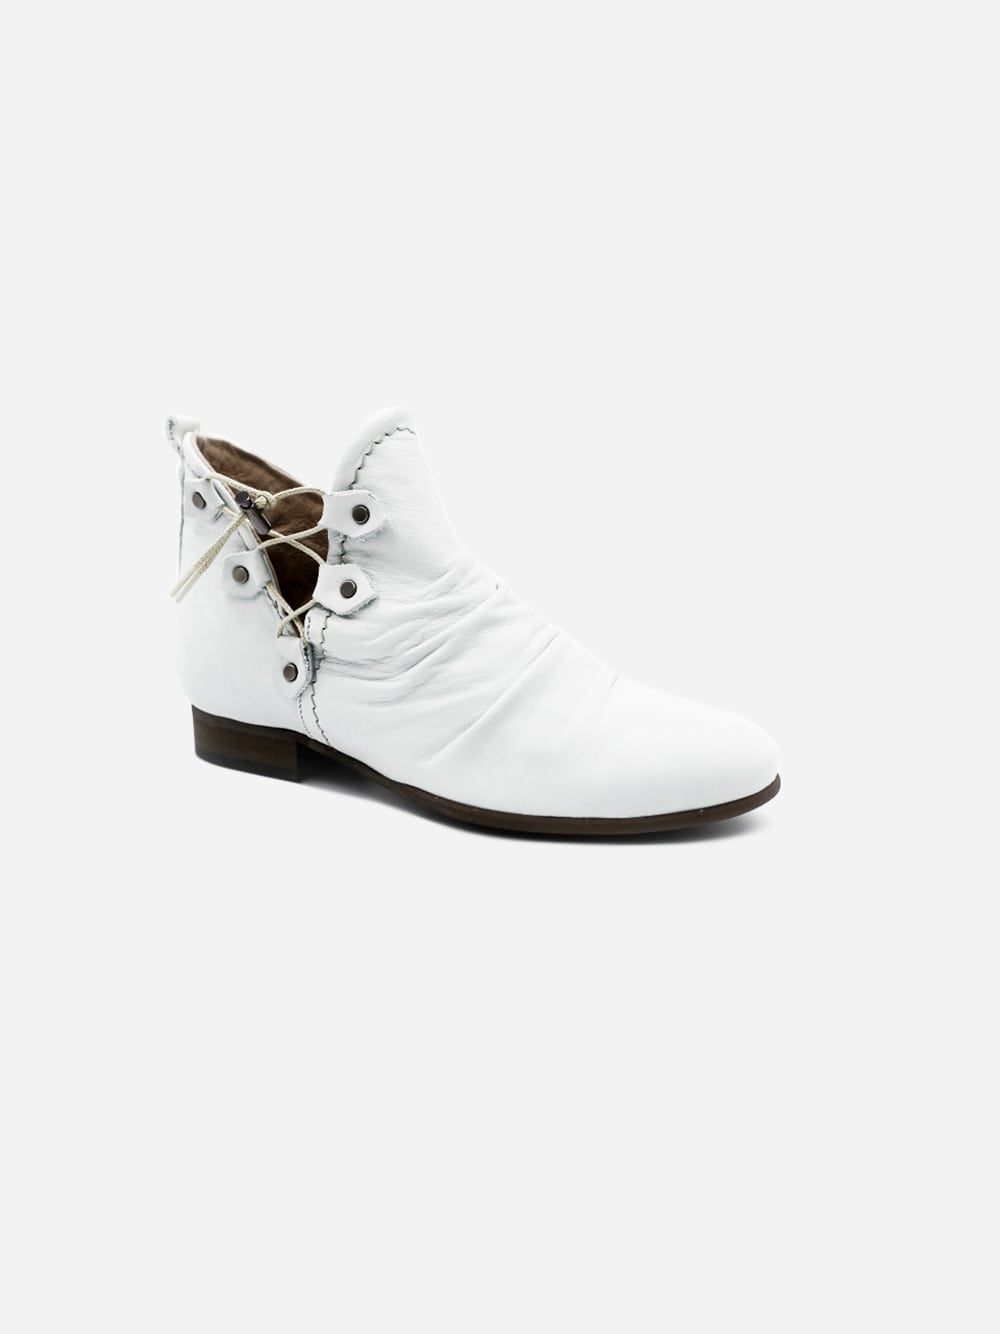 Audra White Ankle Boots | Dkode